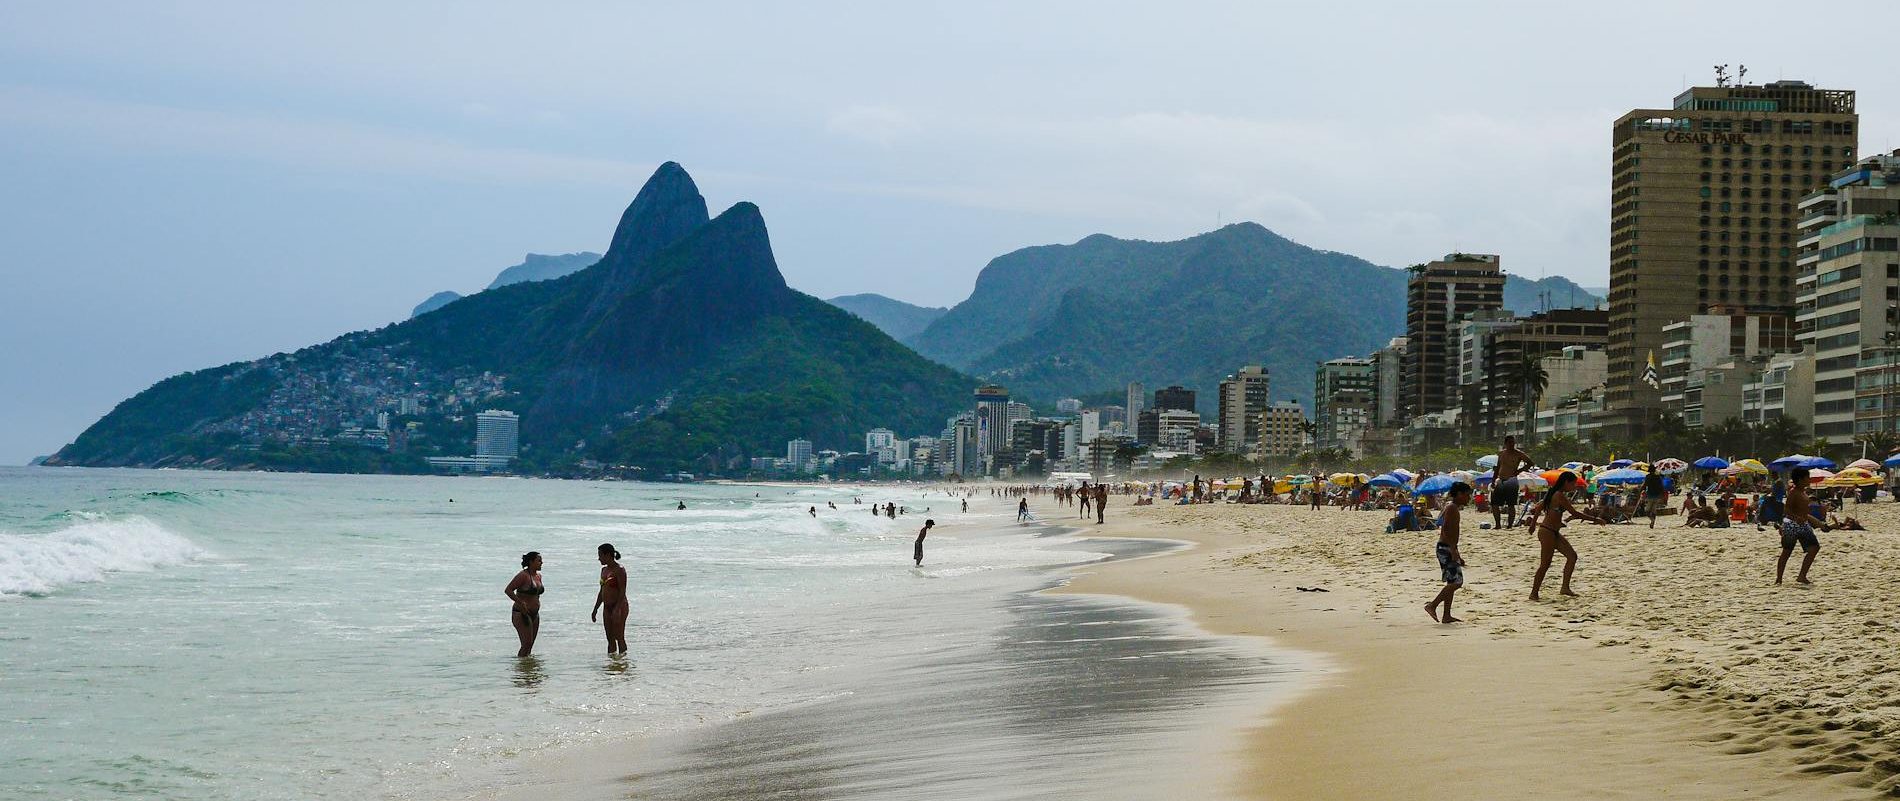 citizens in a beach portraying a bit of what is like to live in brazil